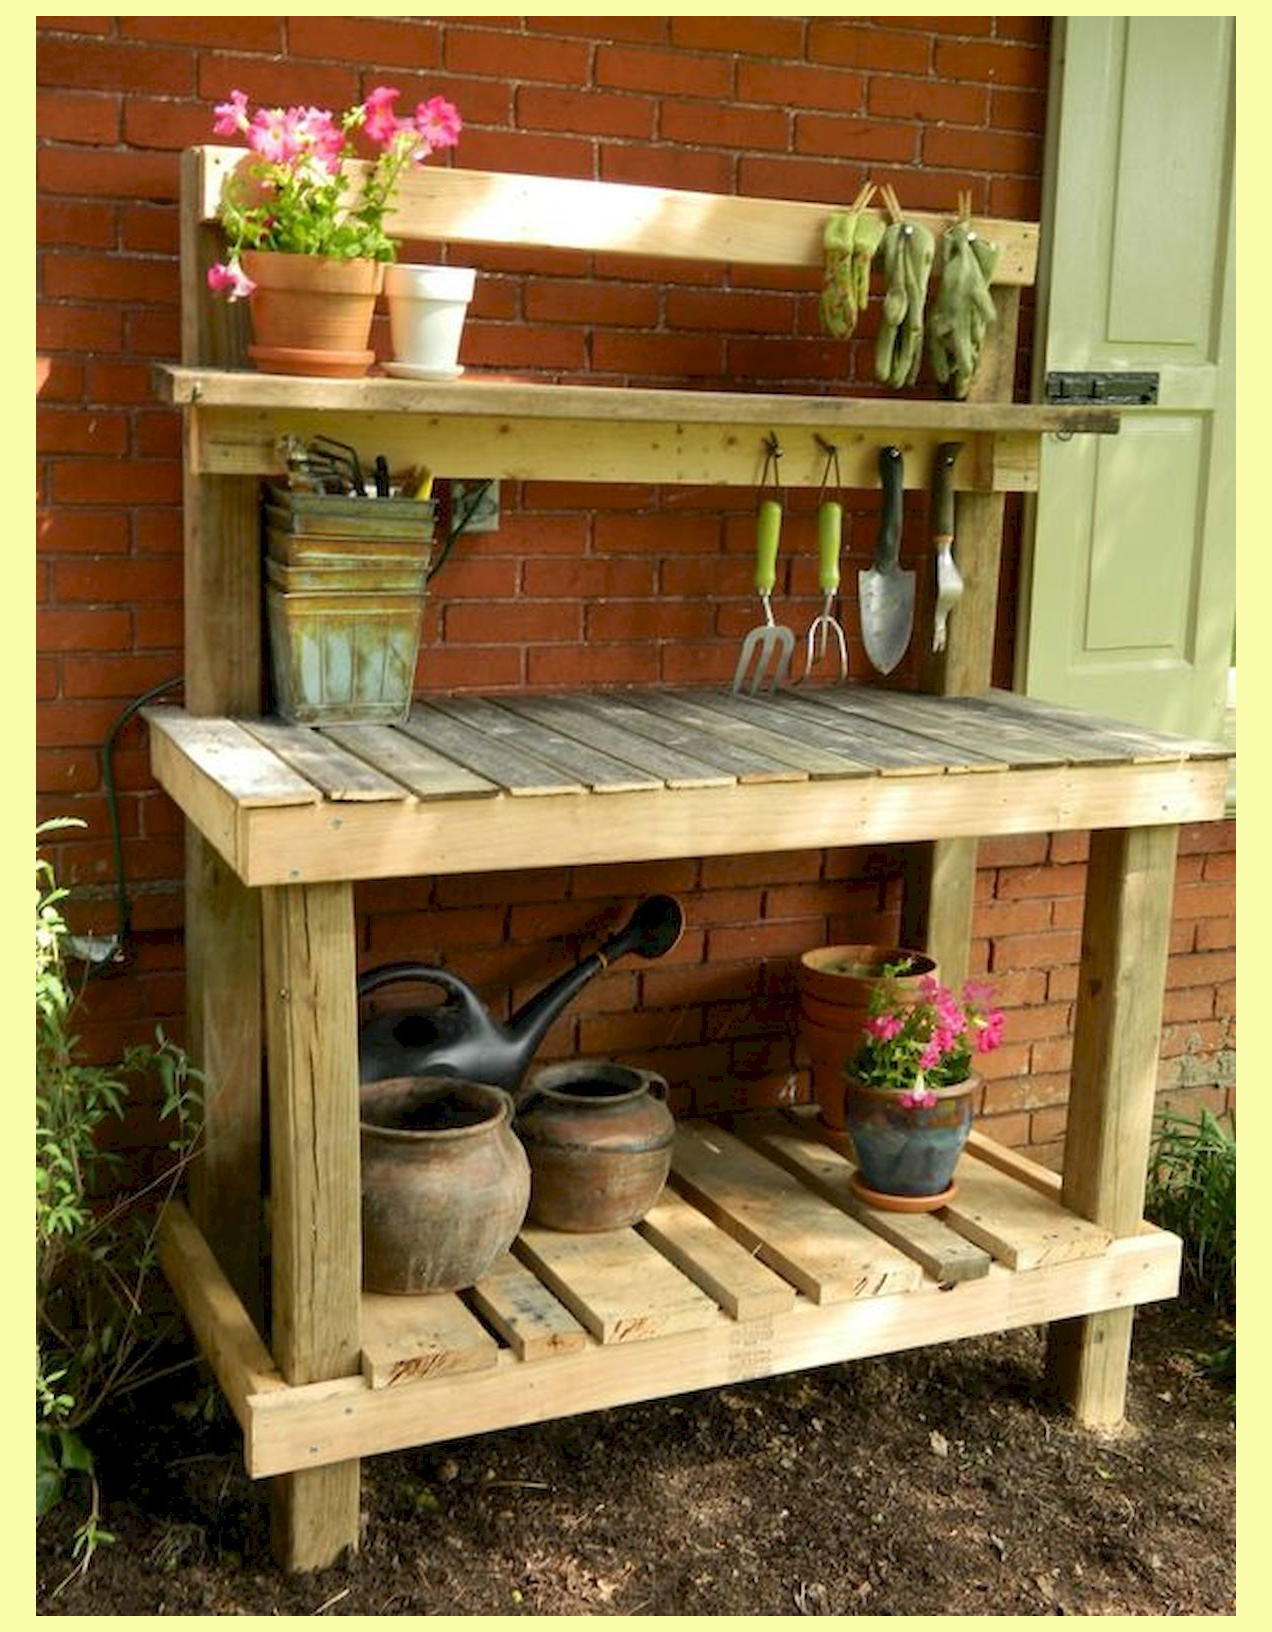 Garden Potting Bench Locally Handcrafted Out Of Redwood Starting At